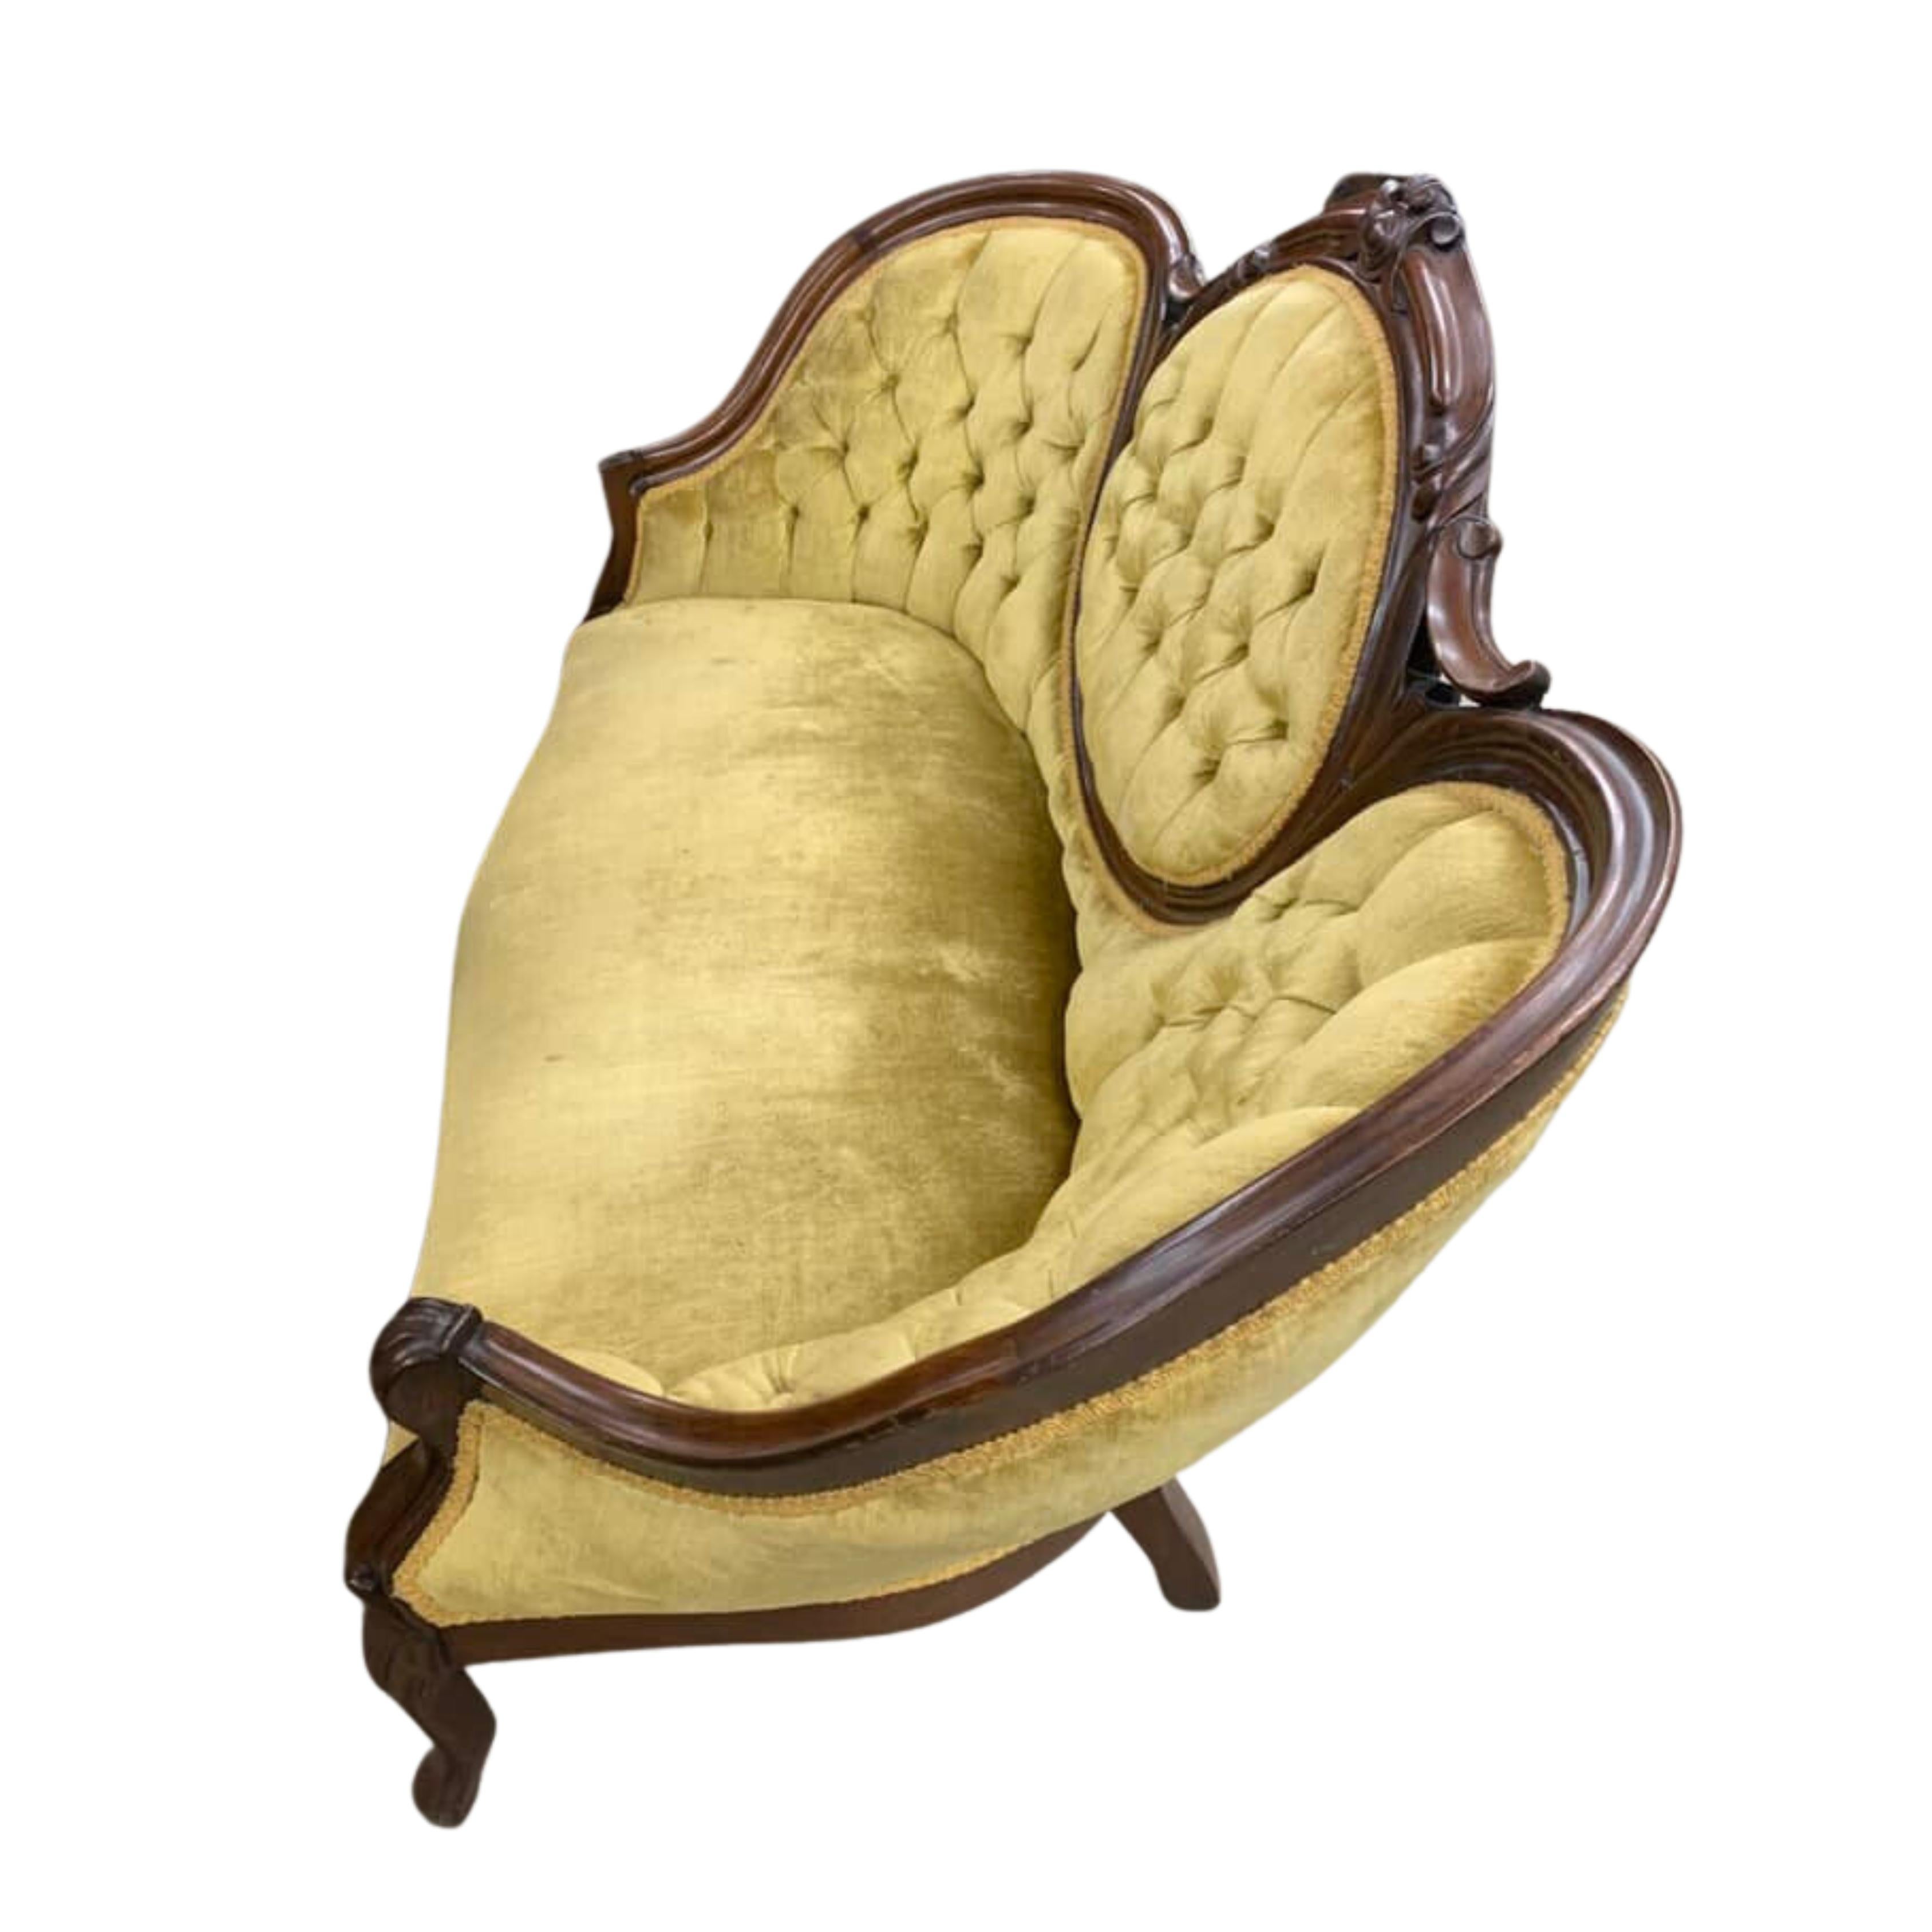 Gorgeous Antique Settee,  Gold Velvet Upholstery,  Victorian Cameo Style Back, Tufted Velvet Upholstery Sofa with Mahogany Wood Trim.  

 Perfect for a parlor, foyer, or entry way.  Antique Settee, Gold, Velvet,  19th / 20th C, 1900's, Charming!